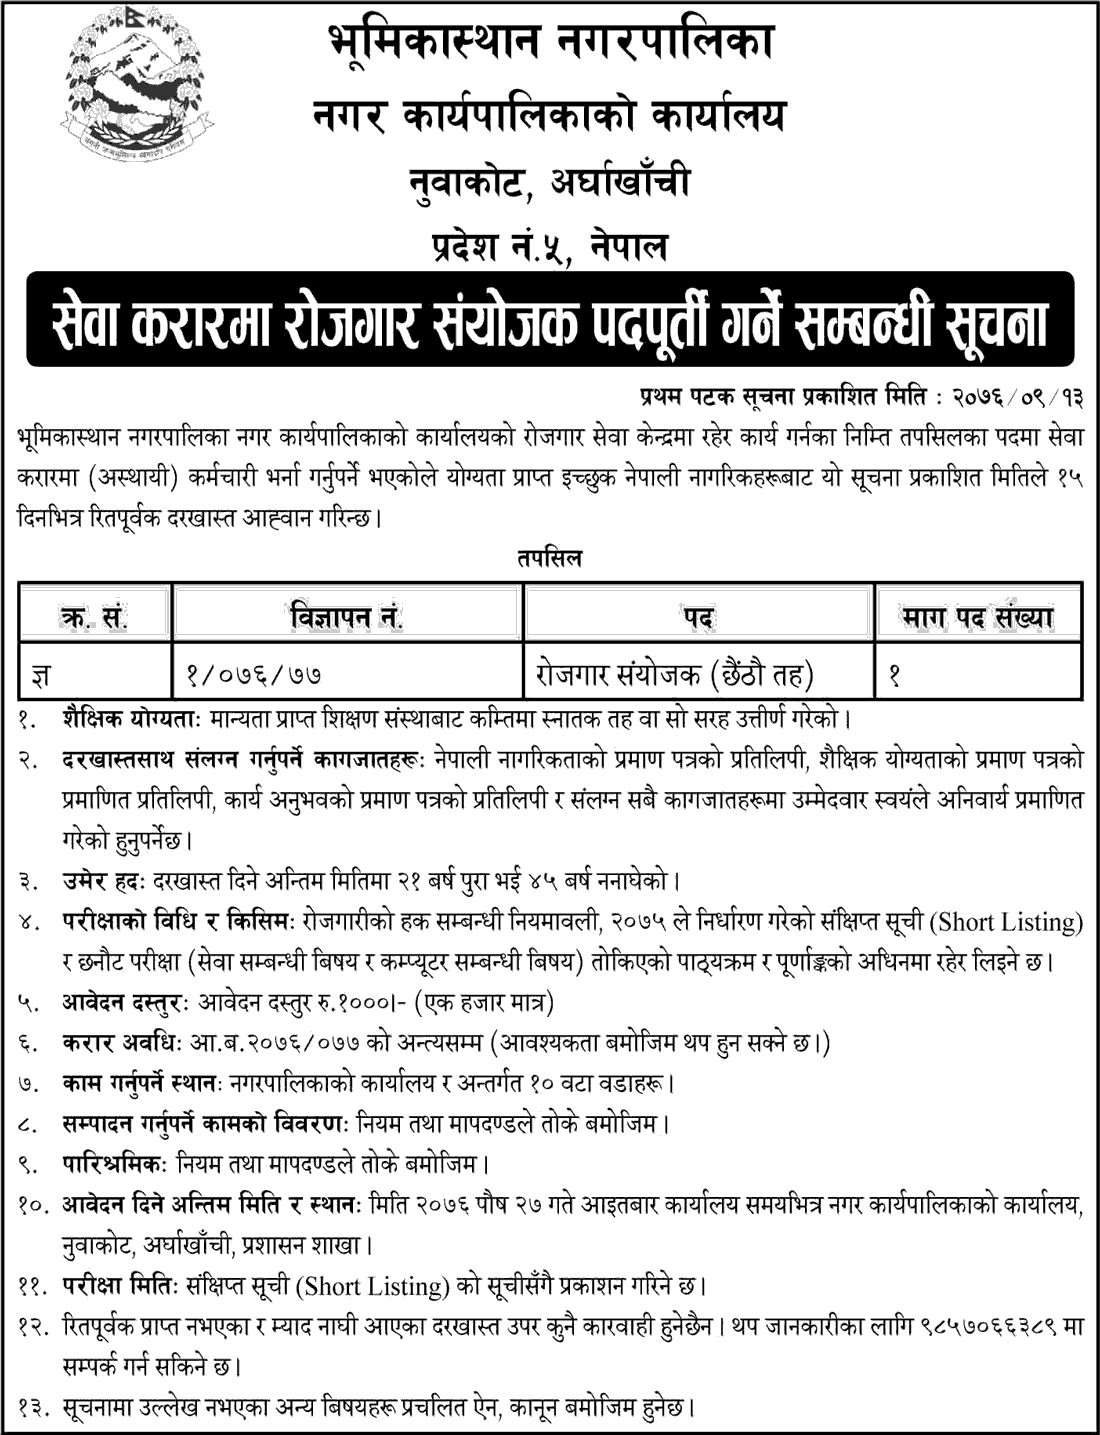 Bhumikasthan Municipality Vacancy for Employment Coordinator